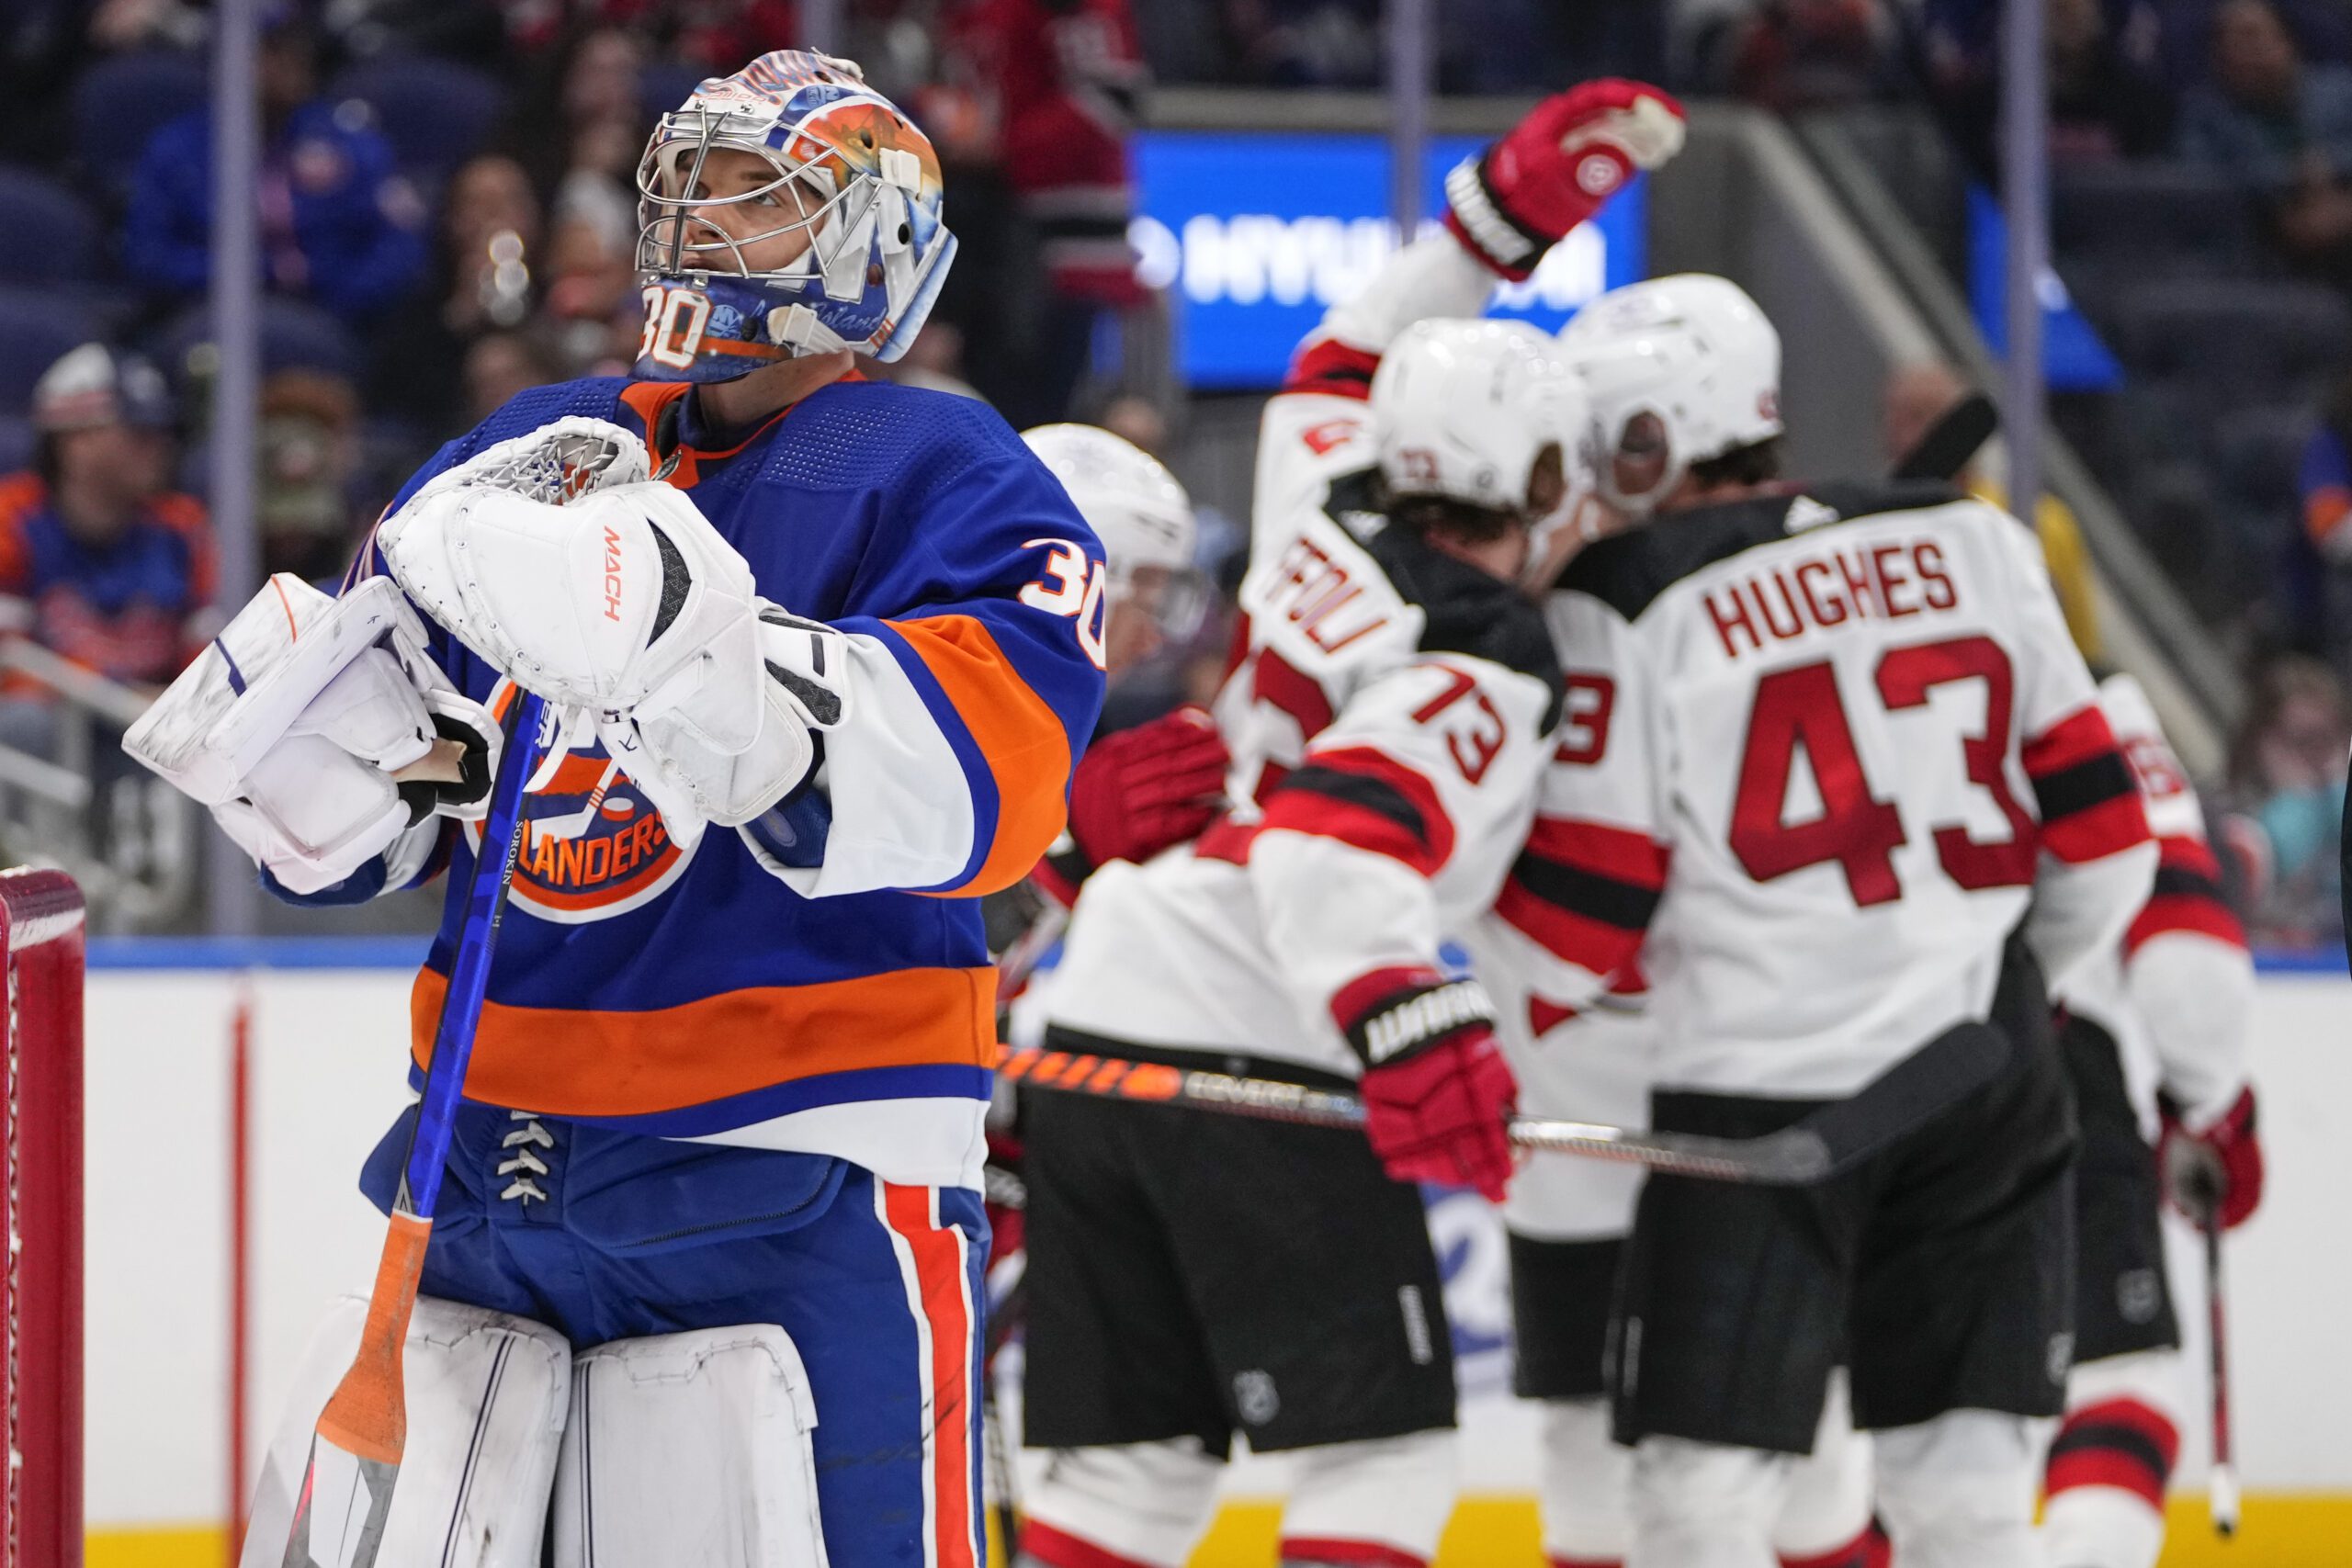 Devils Takeaways: The Power Play Dominates, A Far Better Start, & the Right Combinations